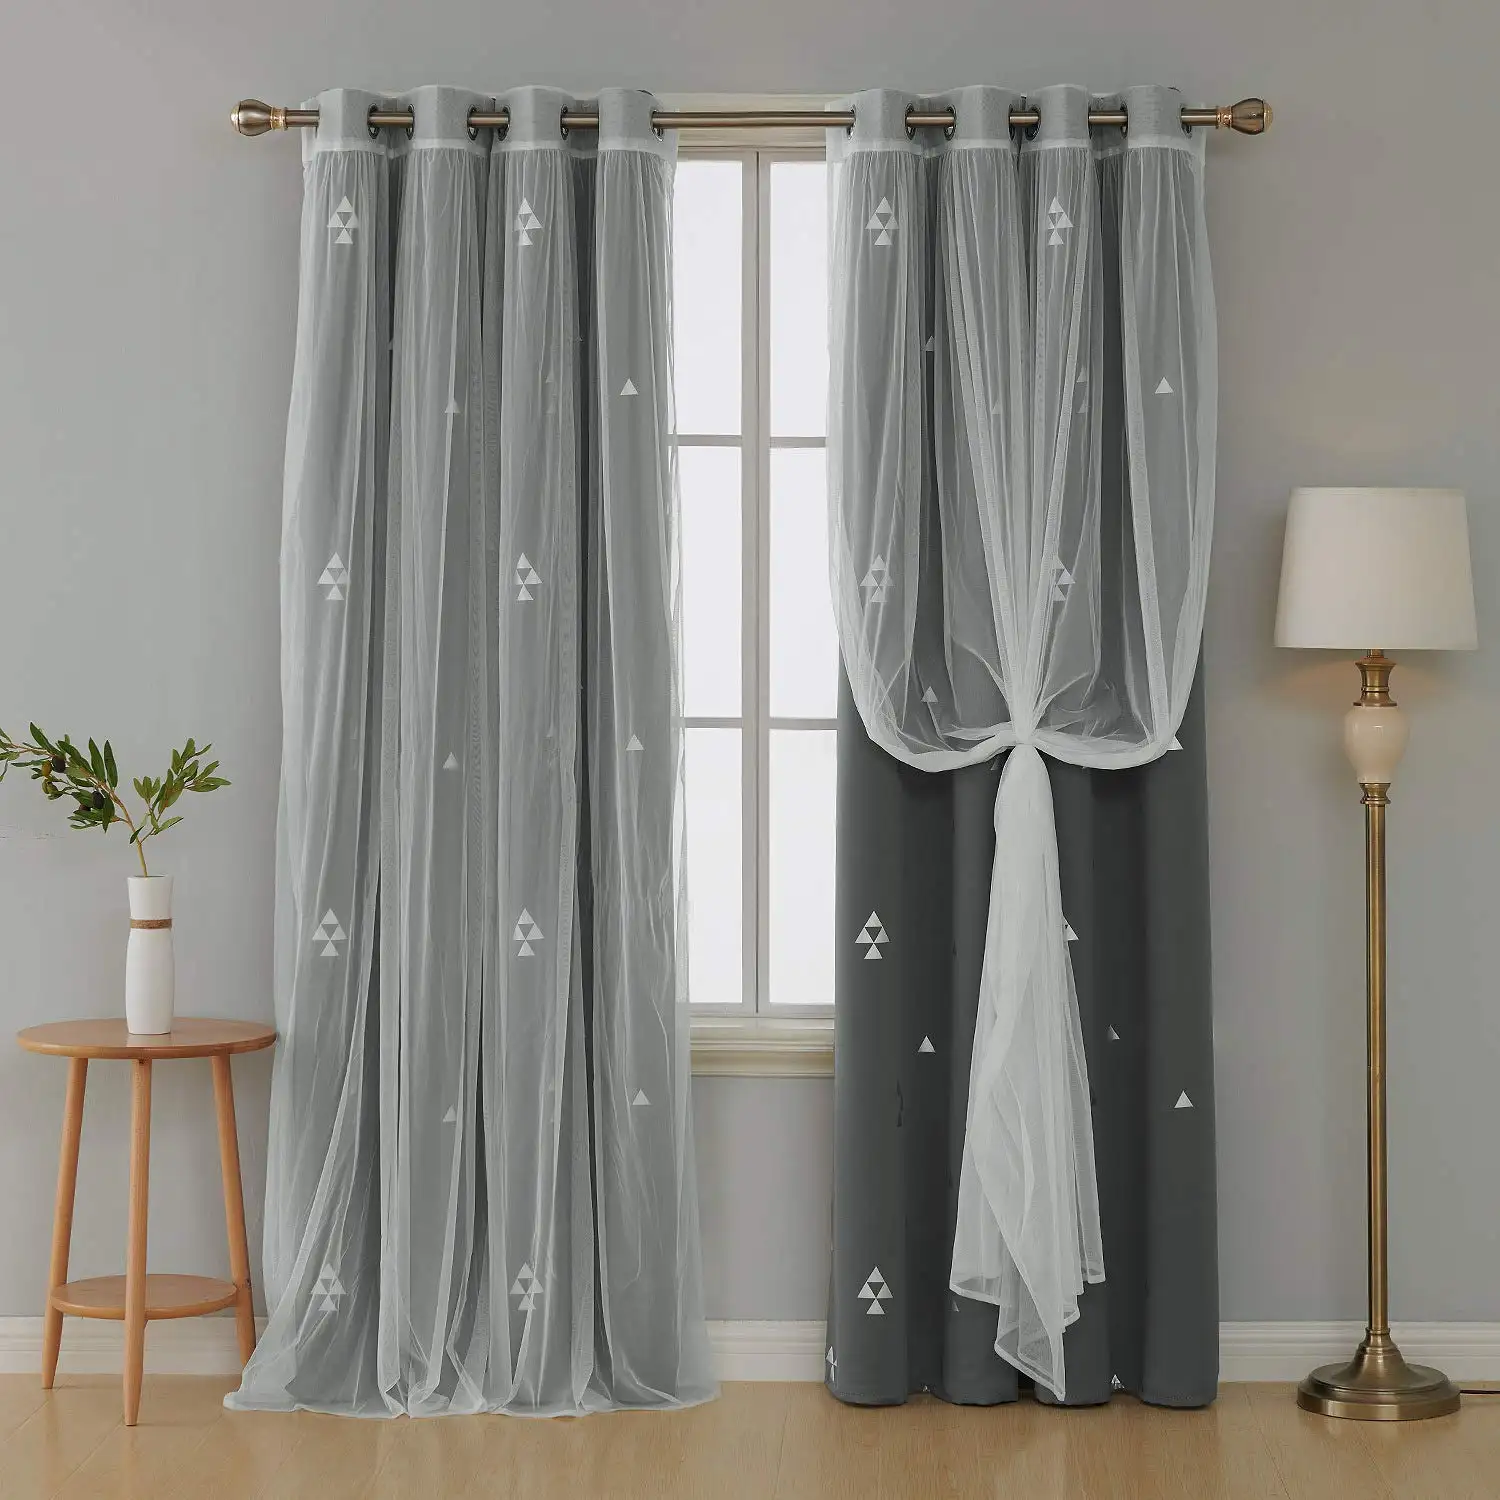 Triangle Printed Blackout Curtains White Tulle Lace Sheer Curtains BoyためのRoomとGrommet